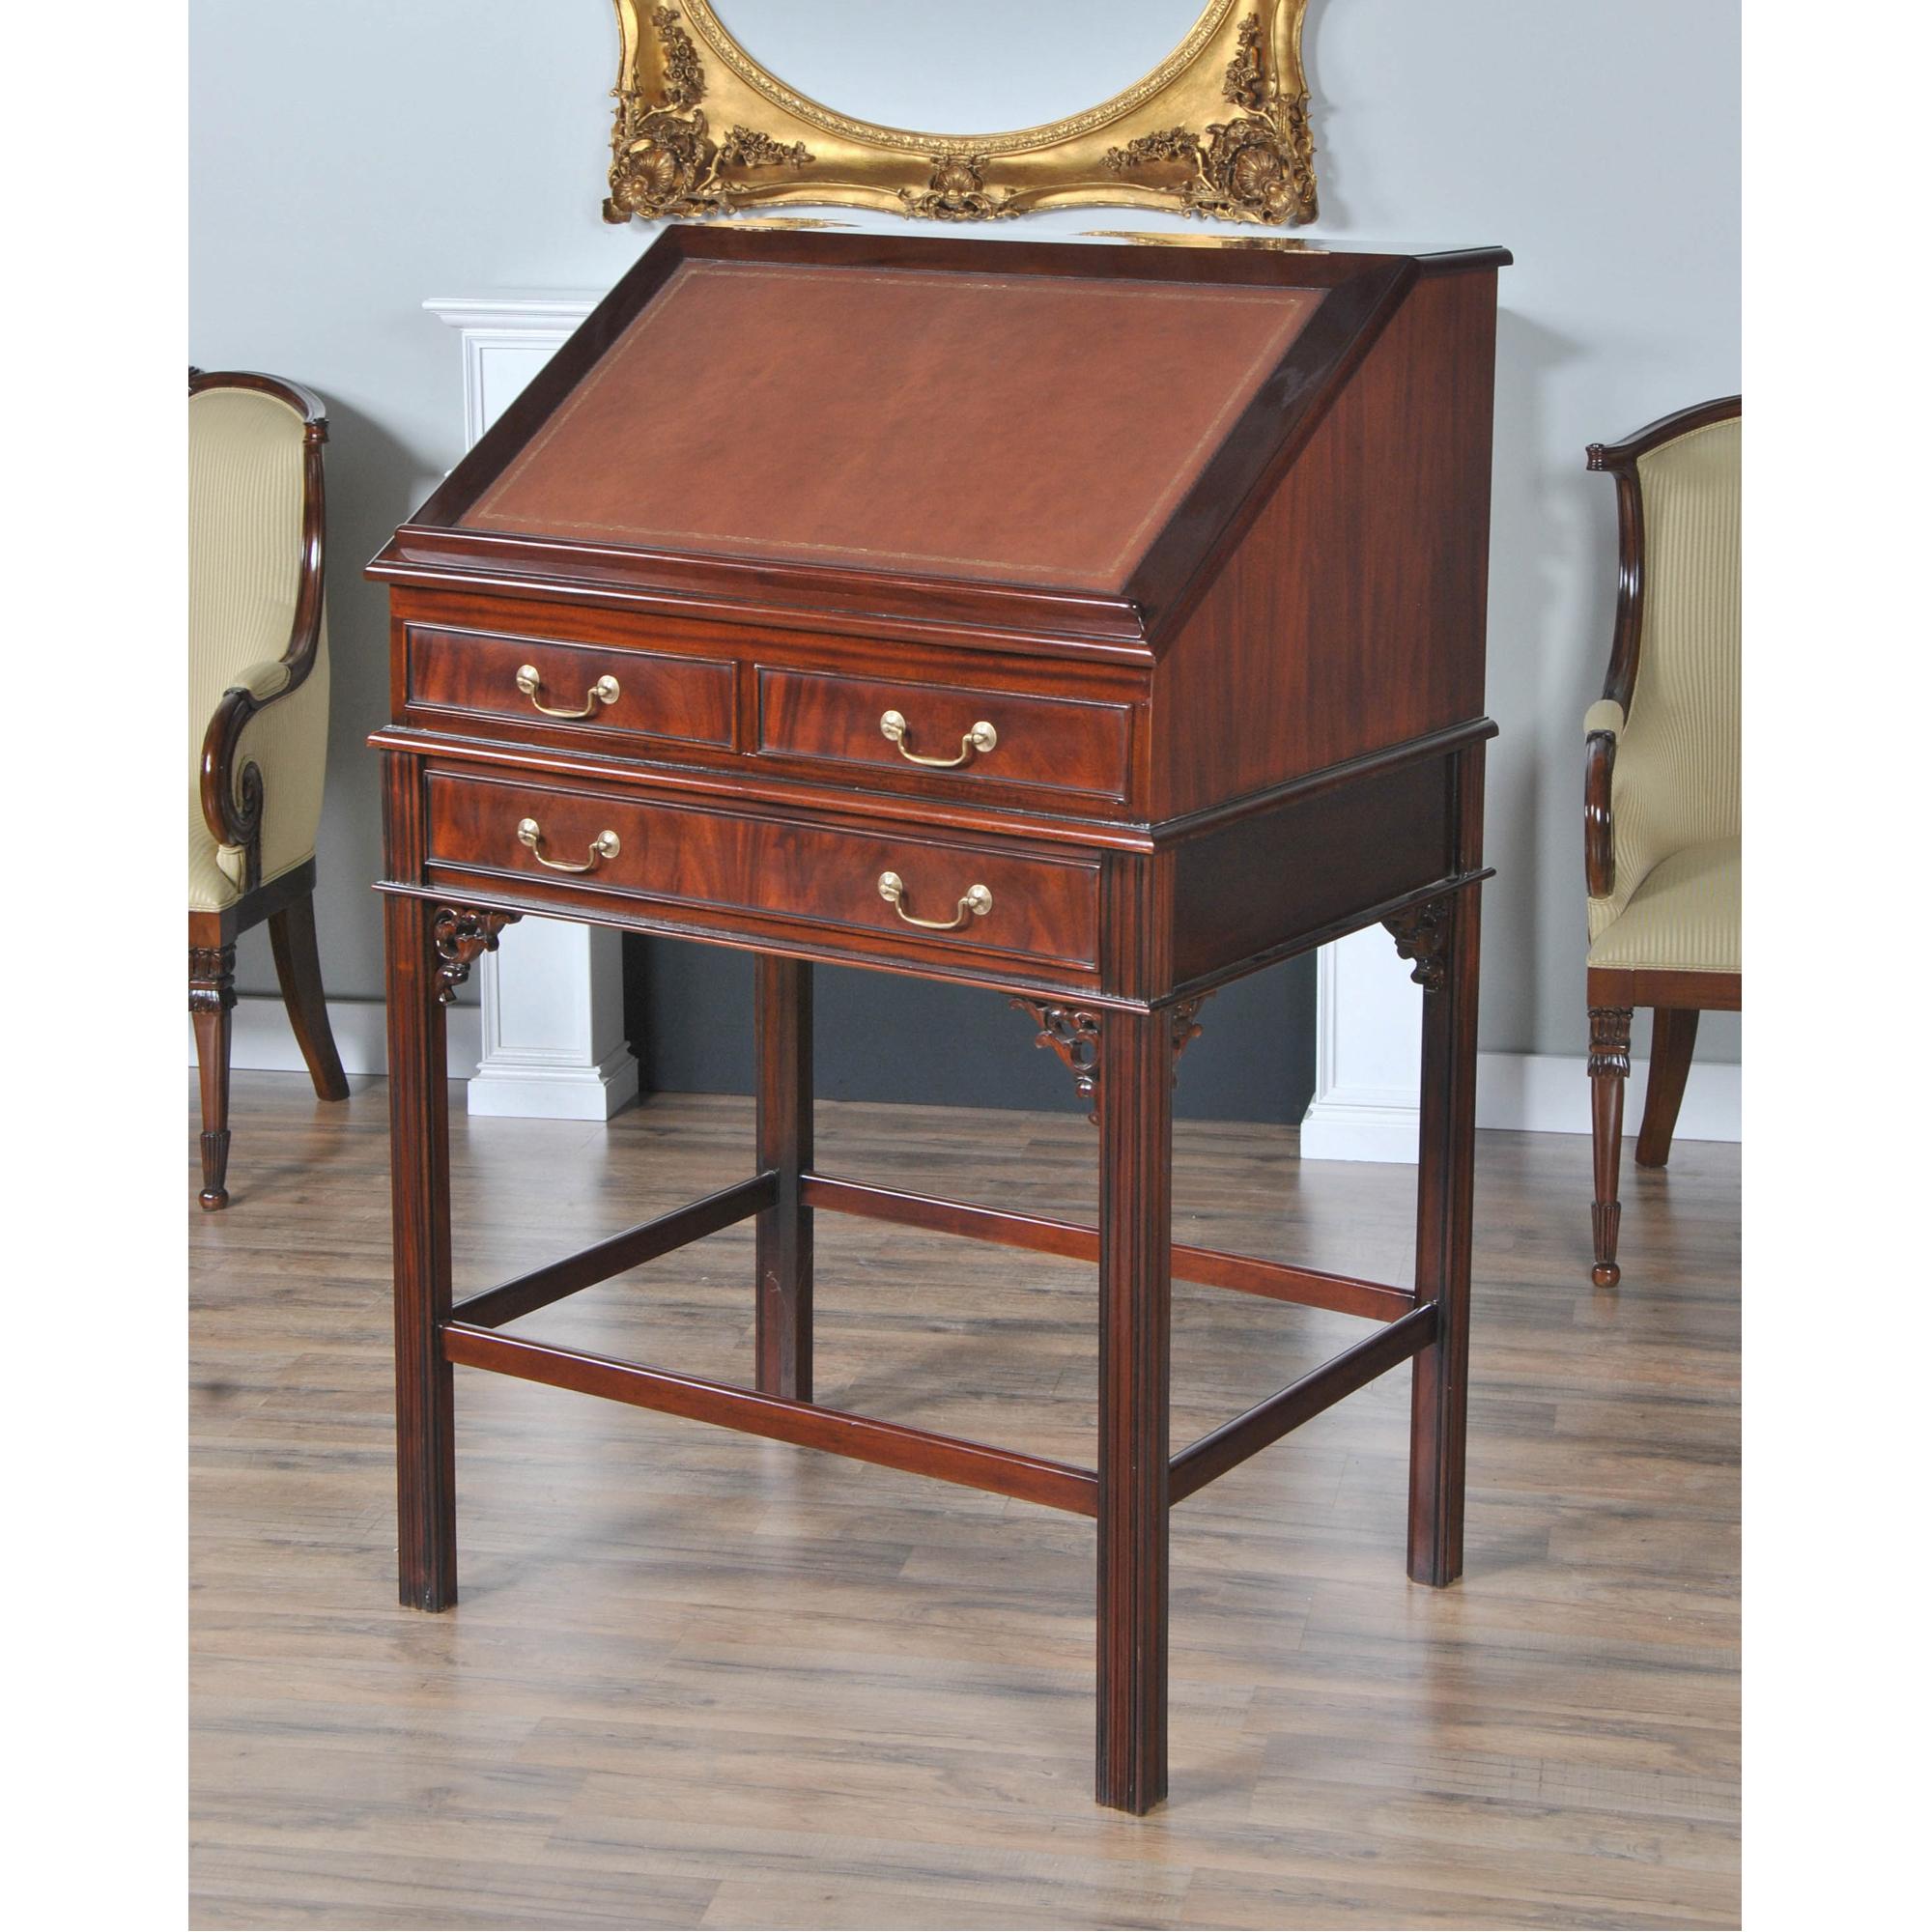 This beautiful Mahogany Stand Up Desk from Niagara Furniture is made of the finest solid mahogany and mahogany veneers. Oversized but with clean lines, this desk has a slant top lid with a genuine full grain leather surface incised with gold